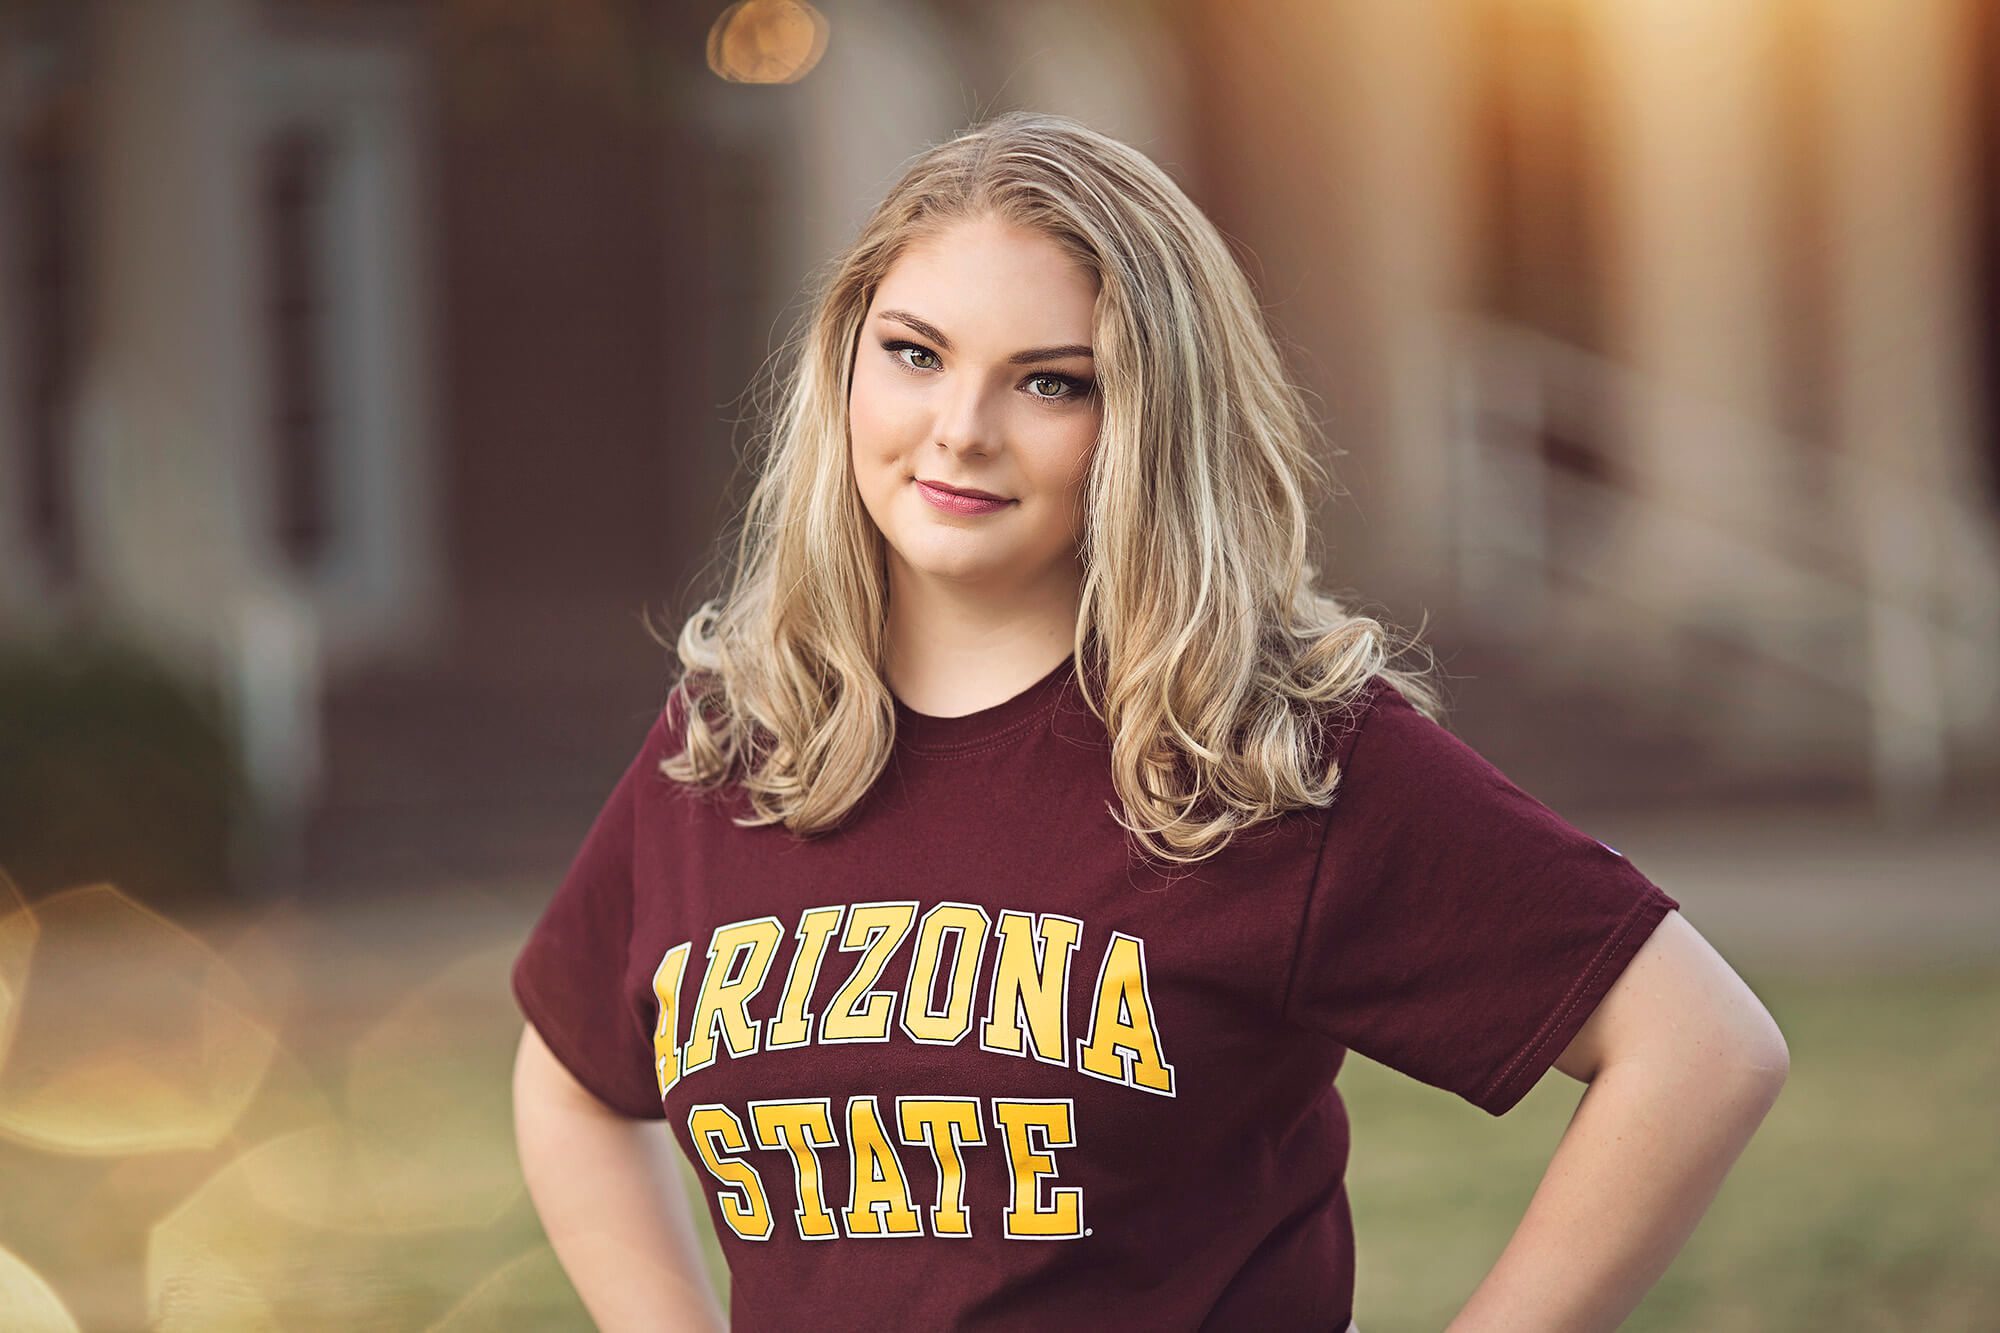 Miss Olivia stands proudly wearing her Arizona State University t-shirt during her senior portrait session